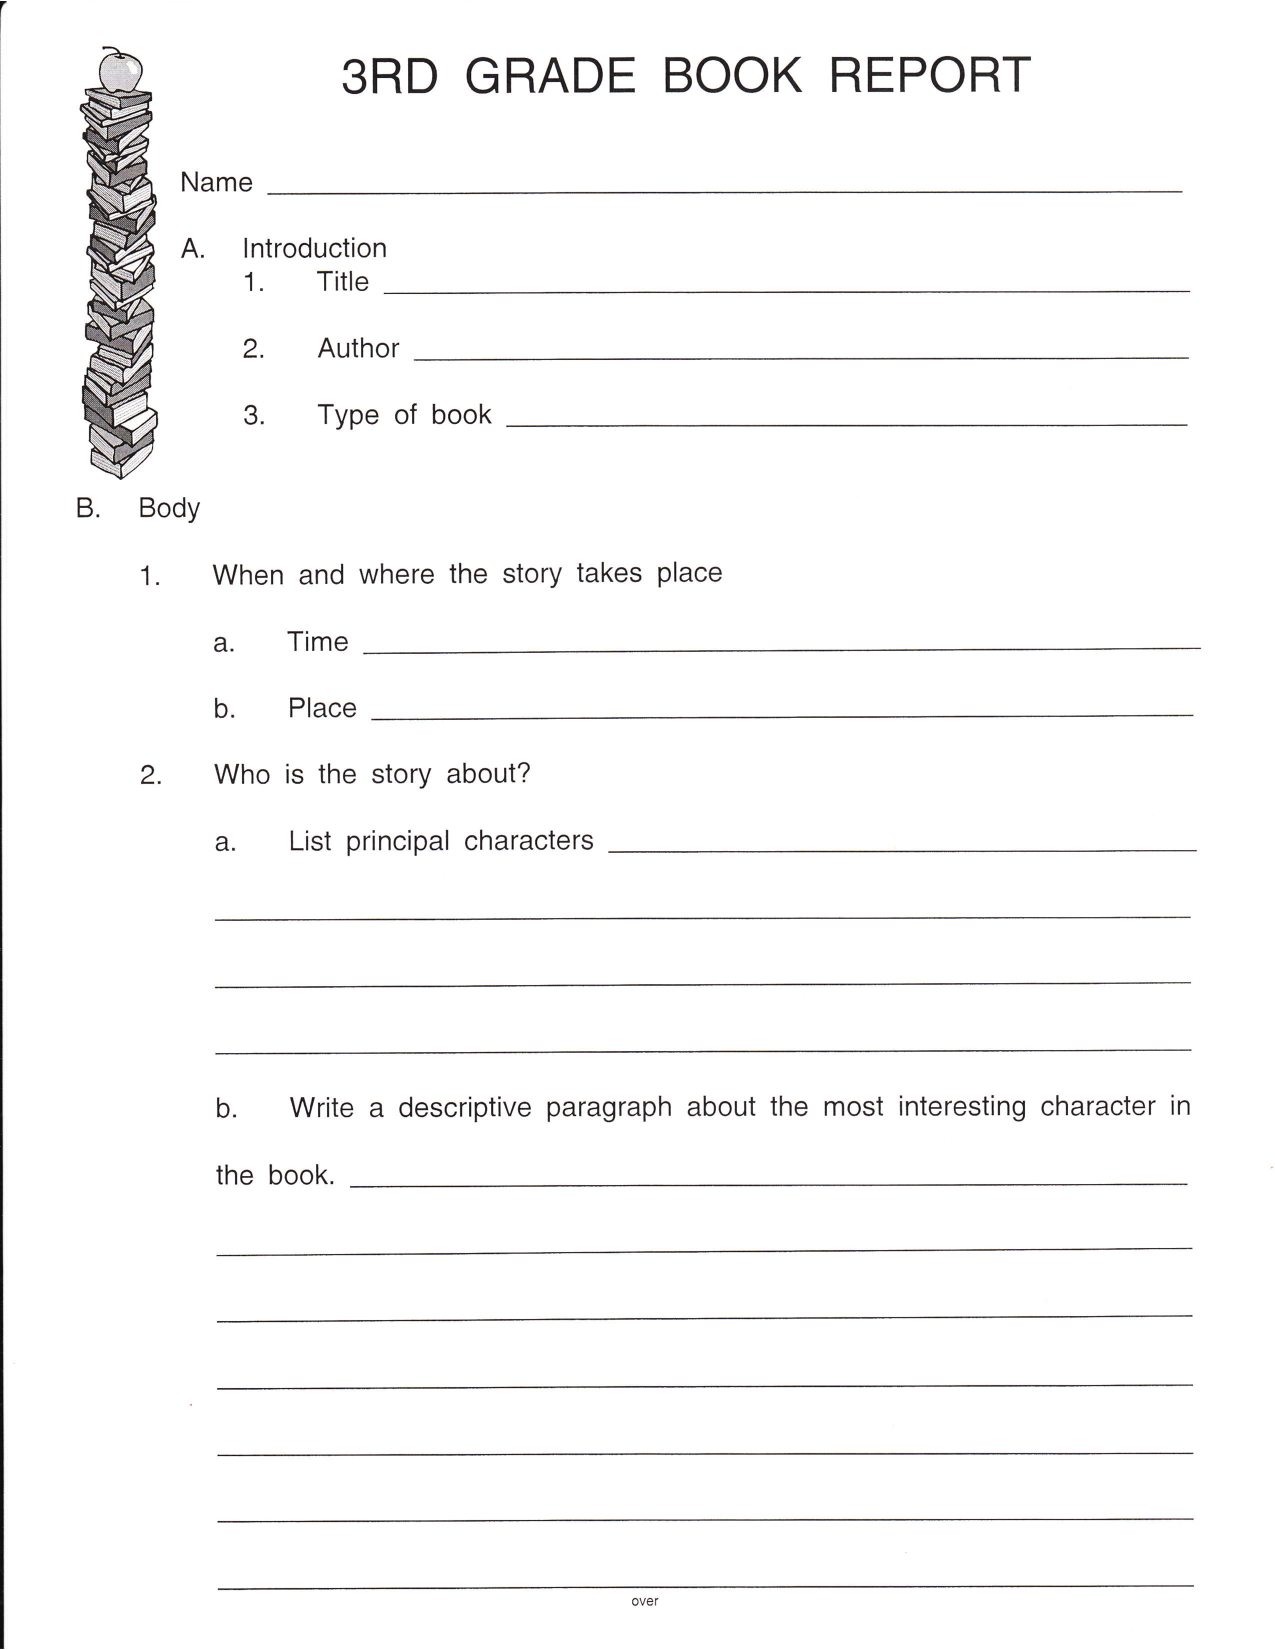 Worksheet Ideas ~ Online First Grade Reading Books Free Intended For 1St Grade Book Report Template